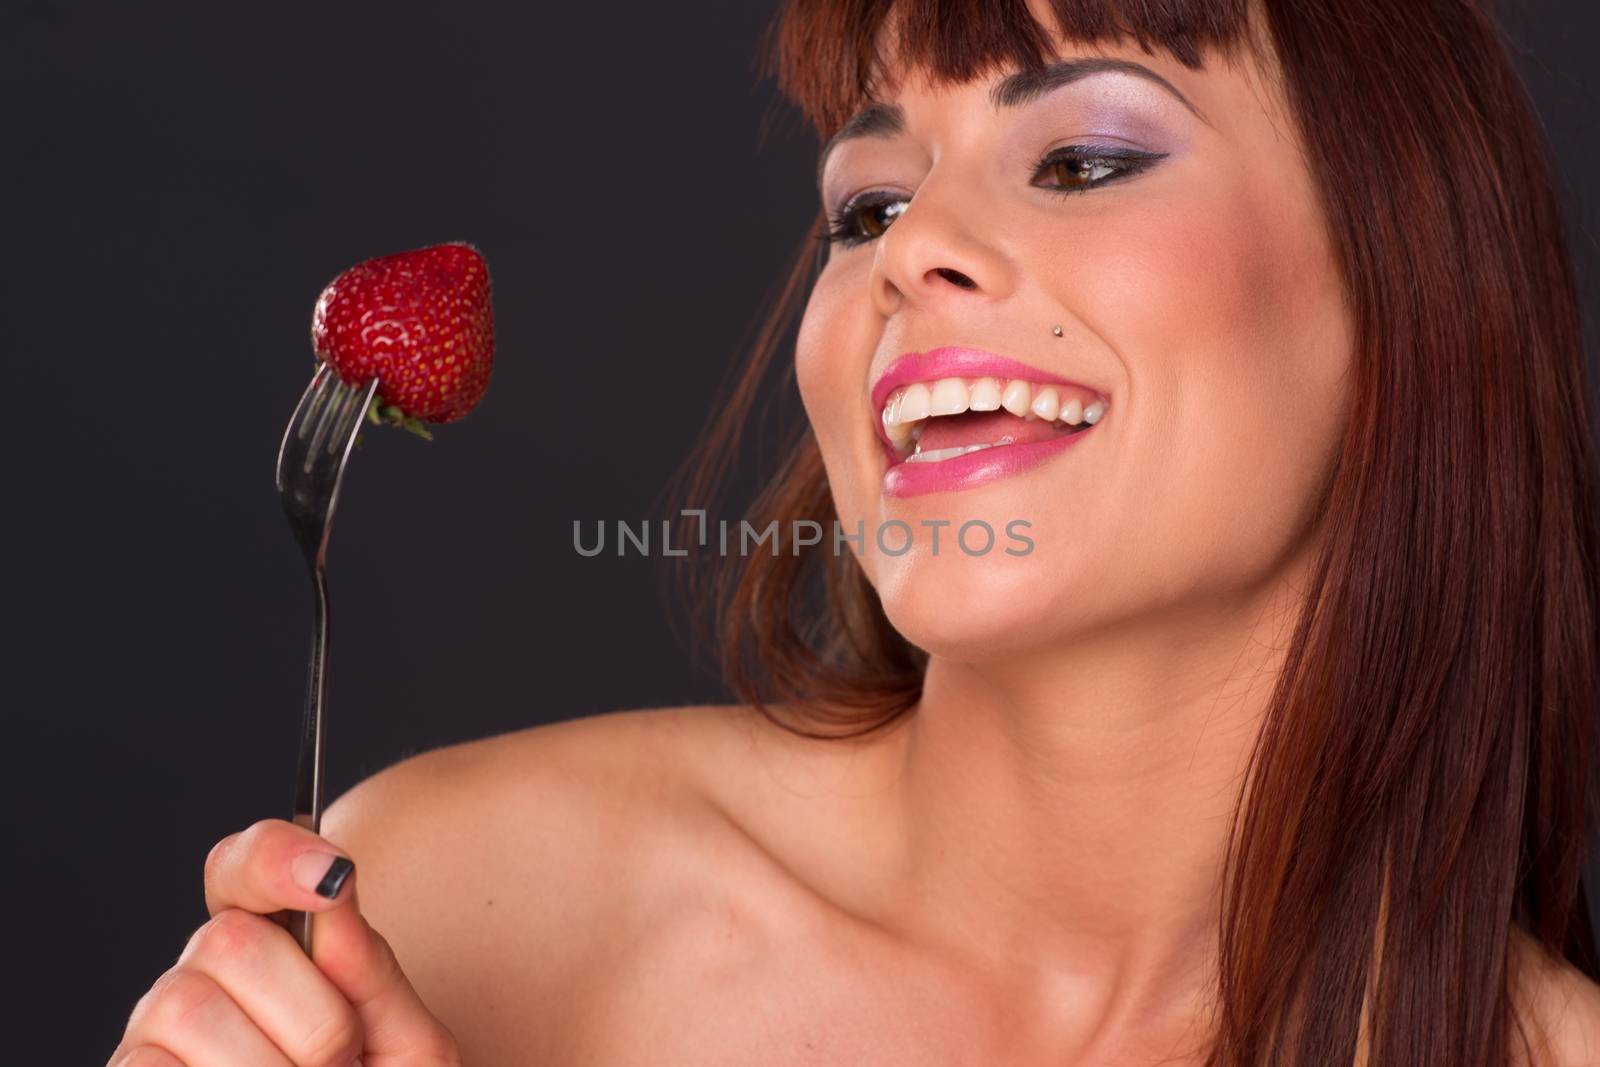 Beautiful Auburn Haired Redhead Woman Food Fruit Strawberry by ChrisBoswell